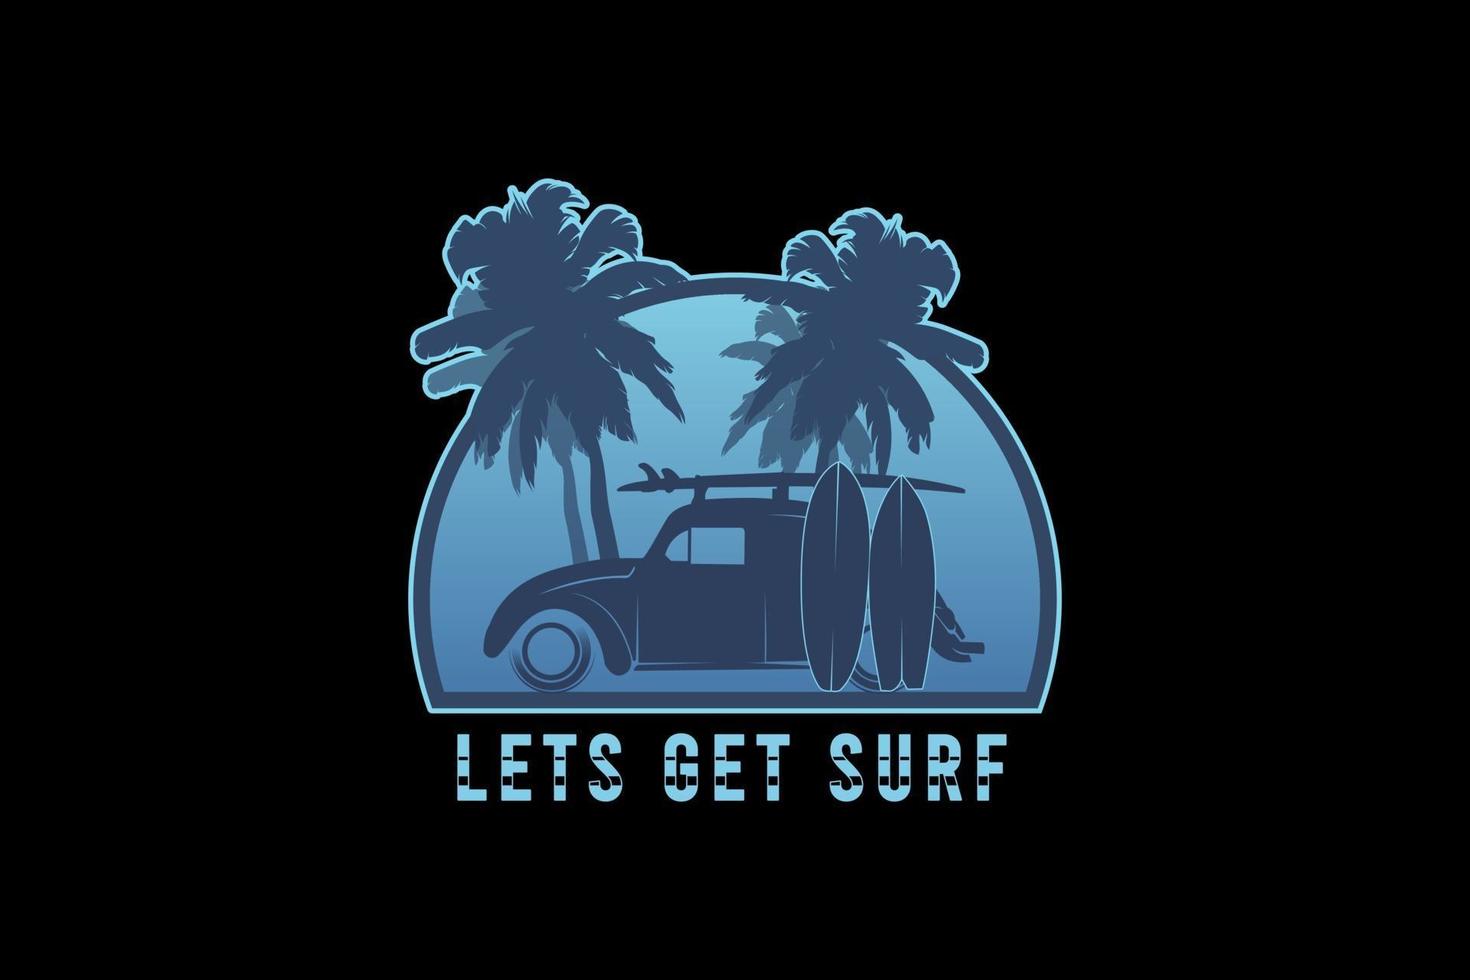 .Let's get surf,retro vintage style hand drawing illustration vector